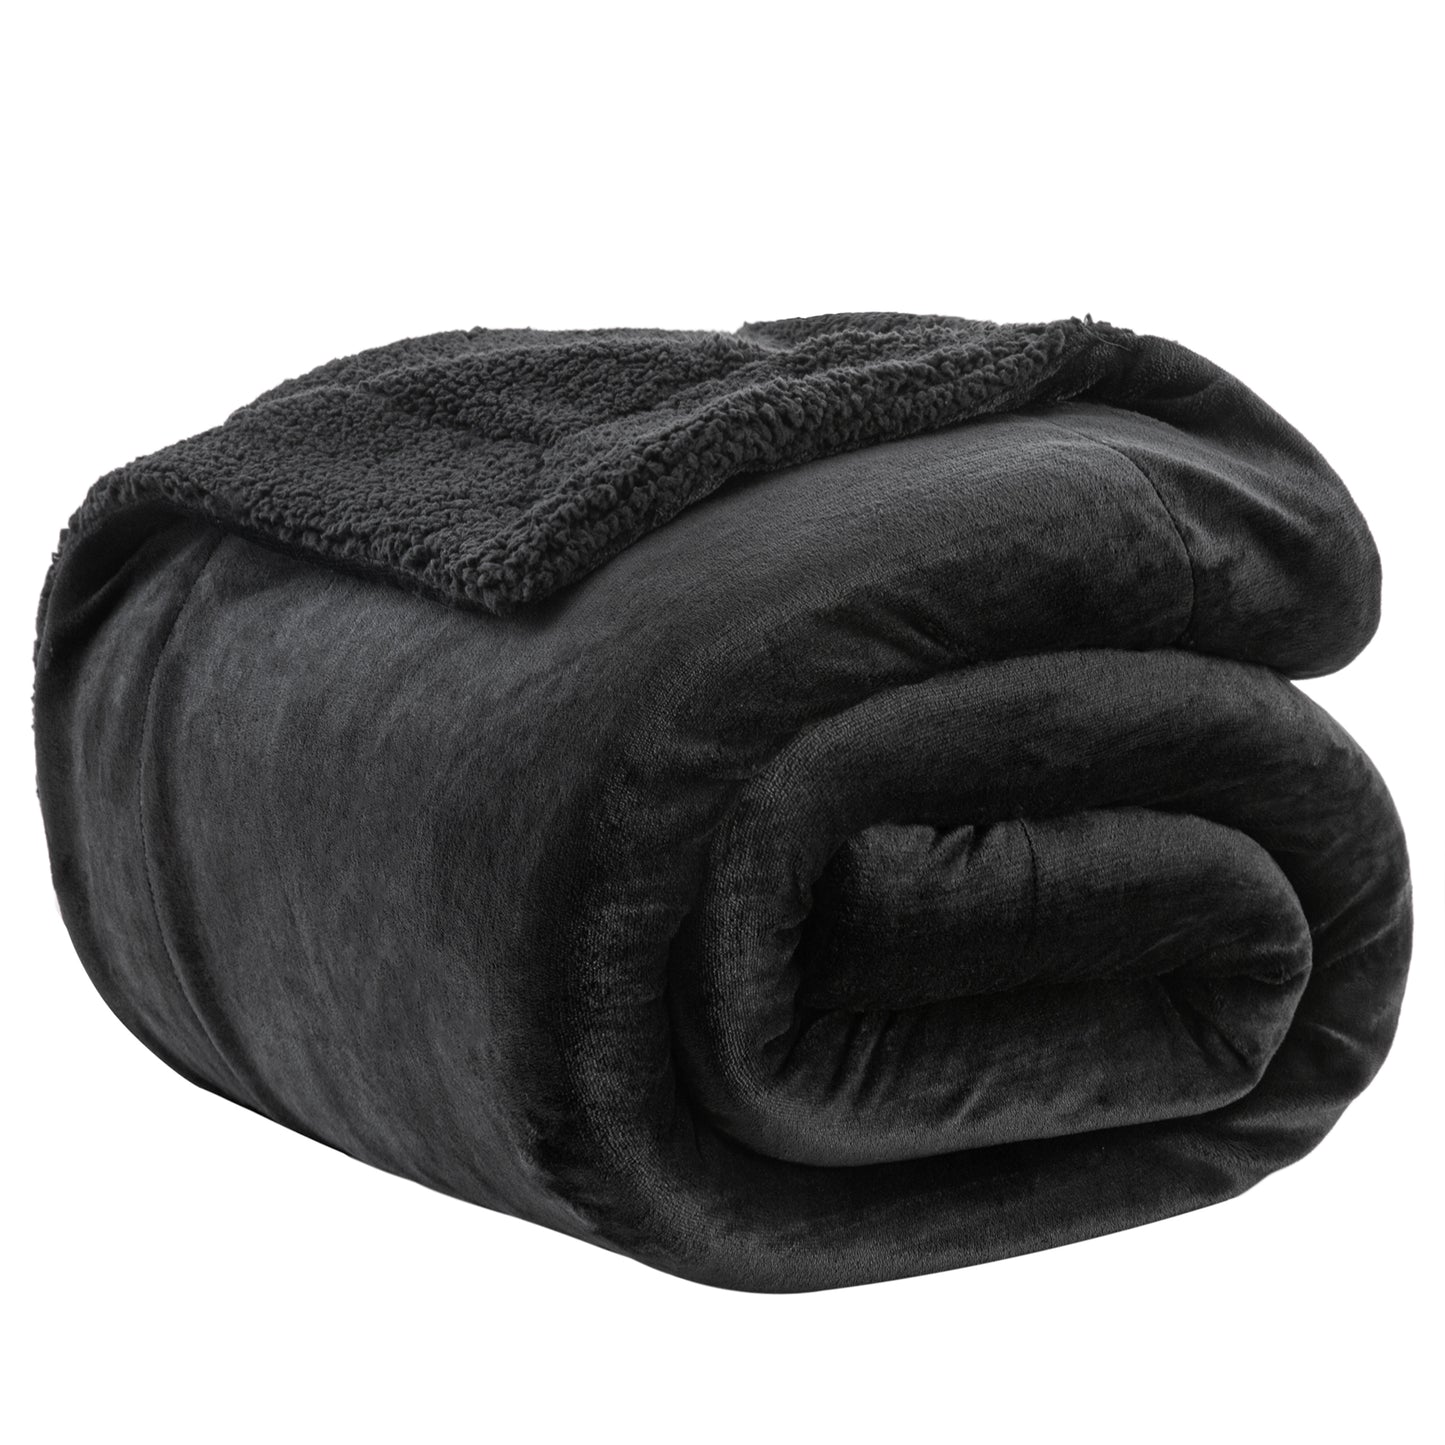 Sherpa Fleece Blankets Queen Size, Grey Thick Warm Blankets for Winter, Super Soft & Cozy Fuzzy Bed Blanket